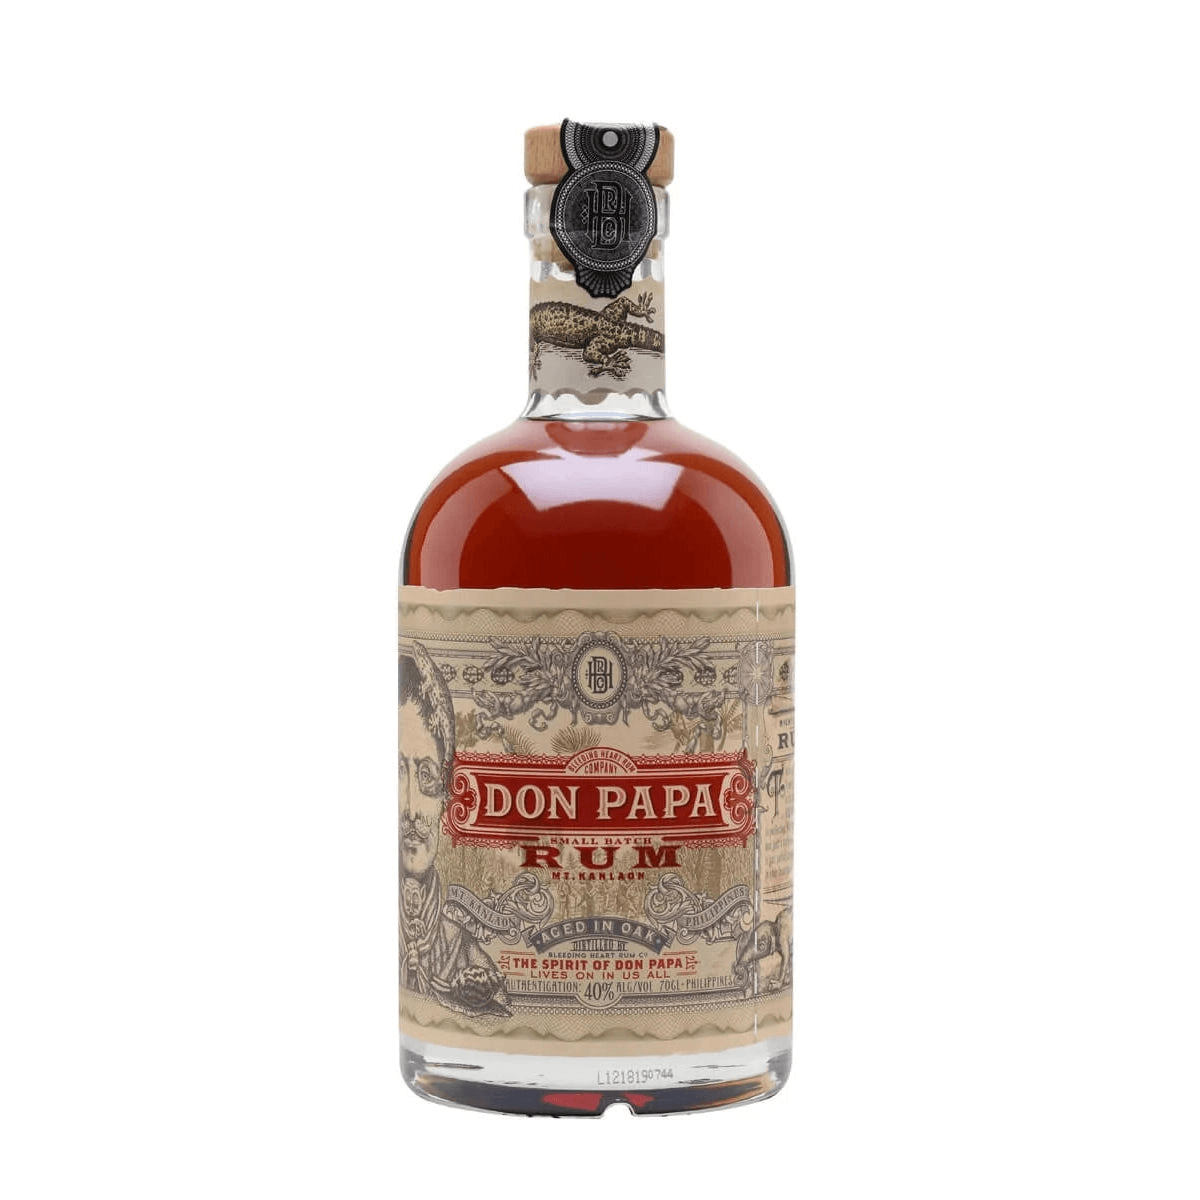 Batch | Papa Small Winebuyers Old Years 40% Rum Vol. 7 0,7L Don